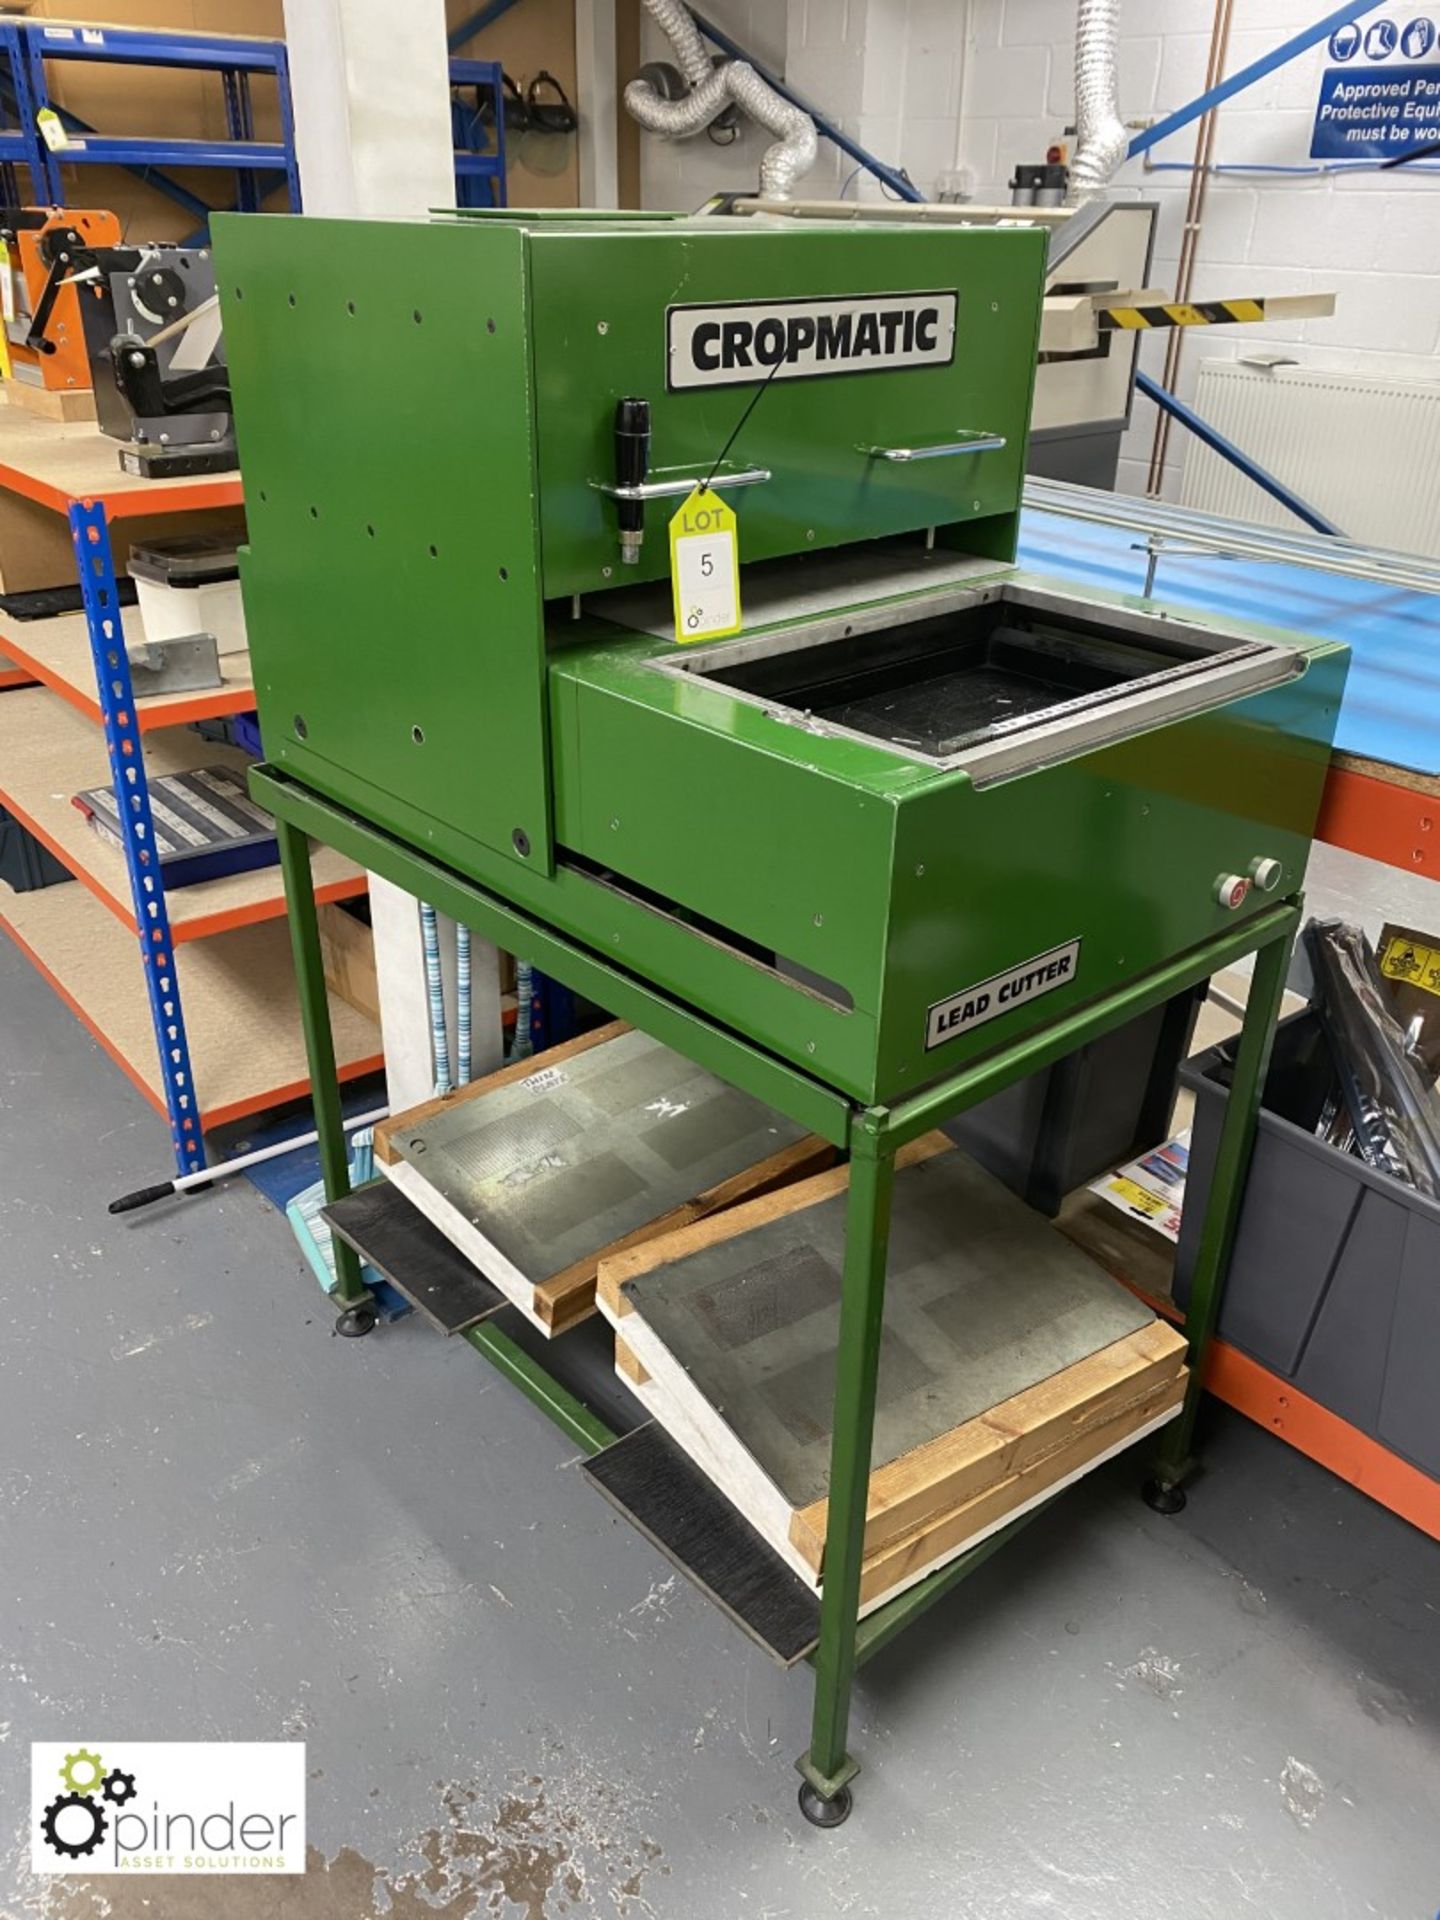 Cropmatic MC Component Cropping Machine, serial number 274, 415volts